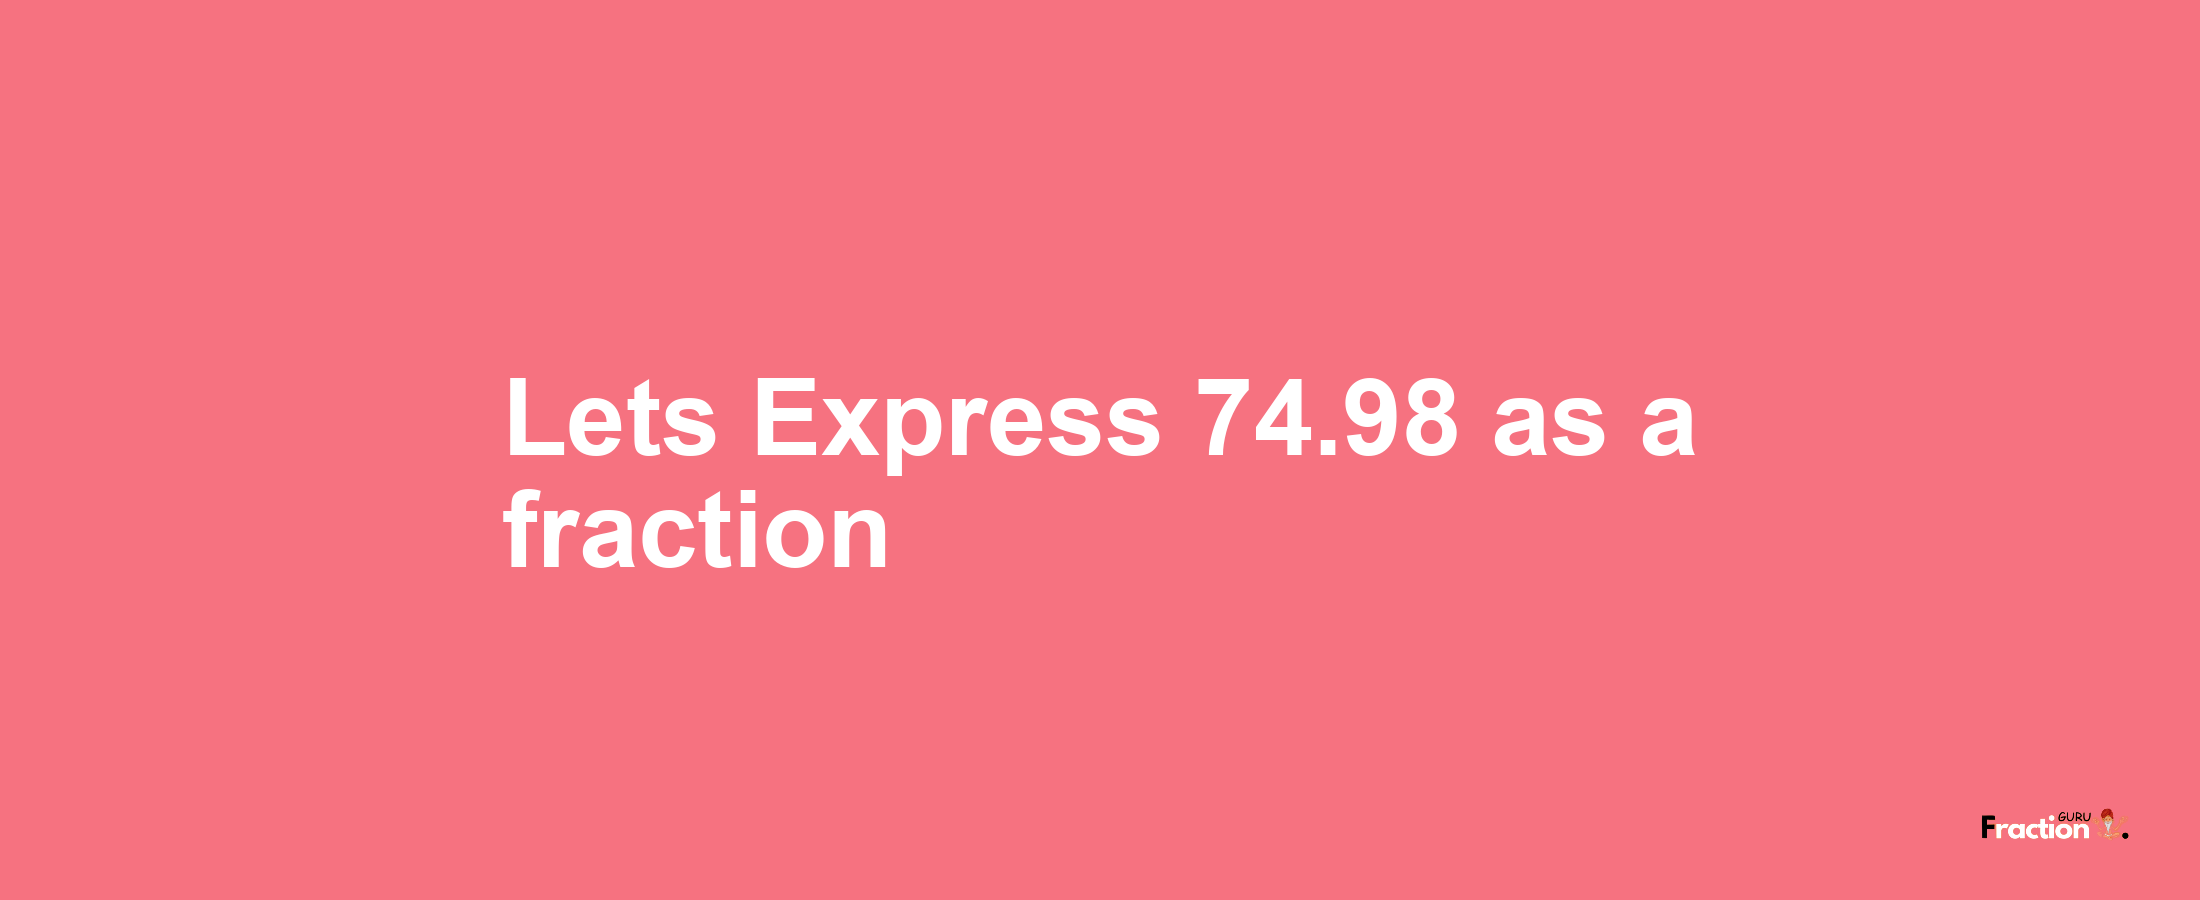 Lets Express 74.98 as afraction